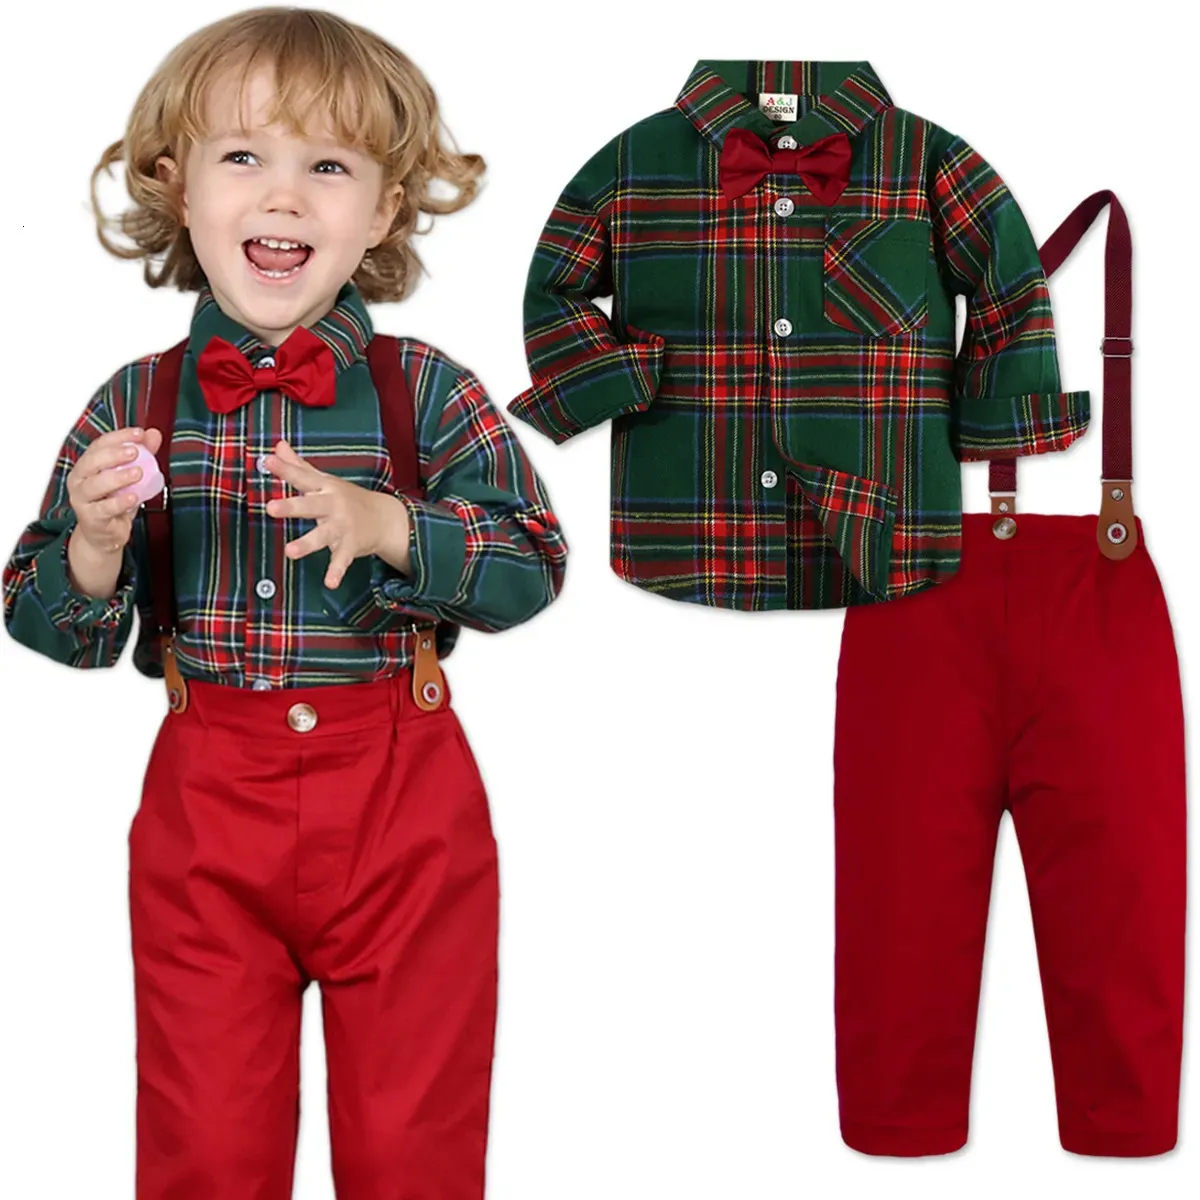 Clothing Sets Baby Christmas Outfit Boy Kids Gentleman Formal Suit Toddler Suspenders Set Infant Party Dress Shirt 231012